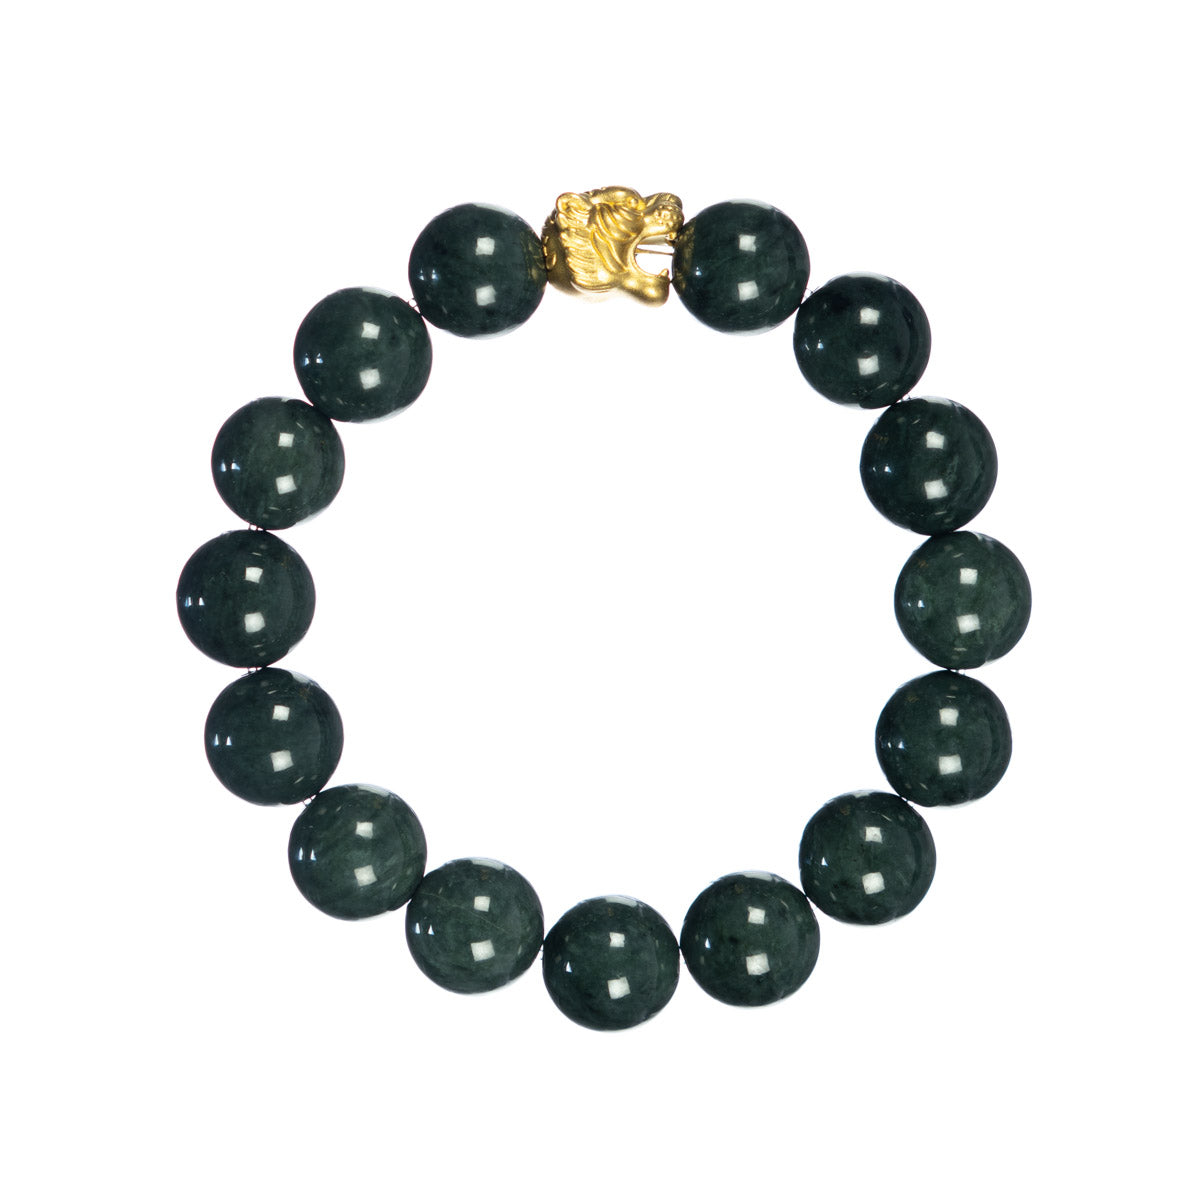 Real Green Jade Beads Bracelet Bangle | Real Jade & Yellow Gold Jewelry 6.5 Inches